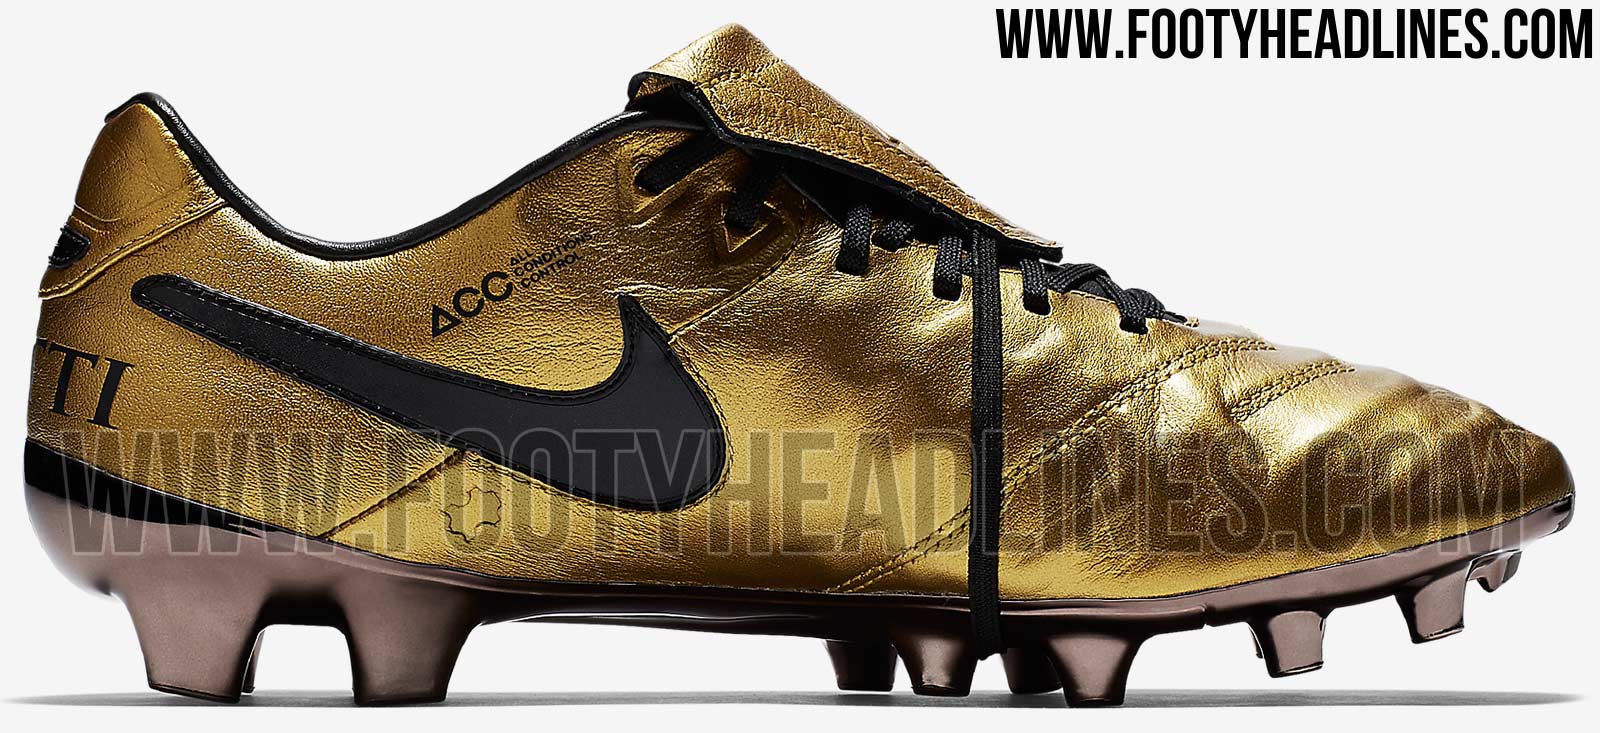 Totti Roma Signature Boots Released - Footy